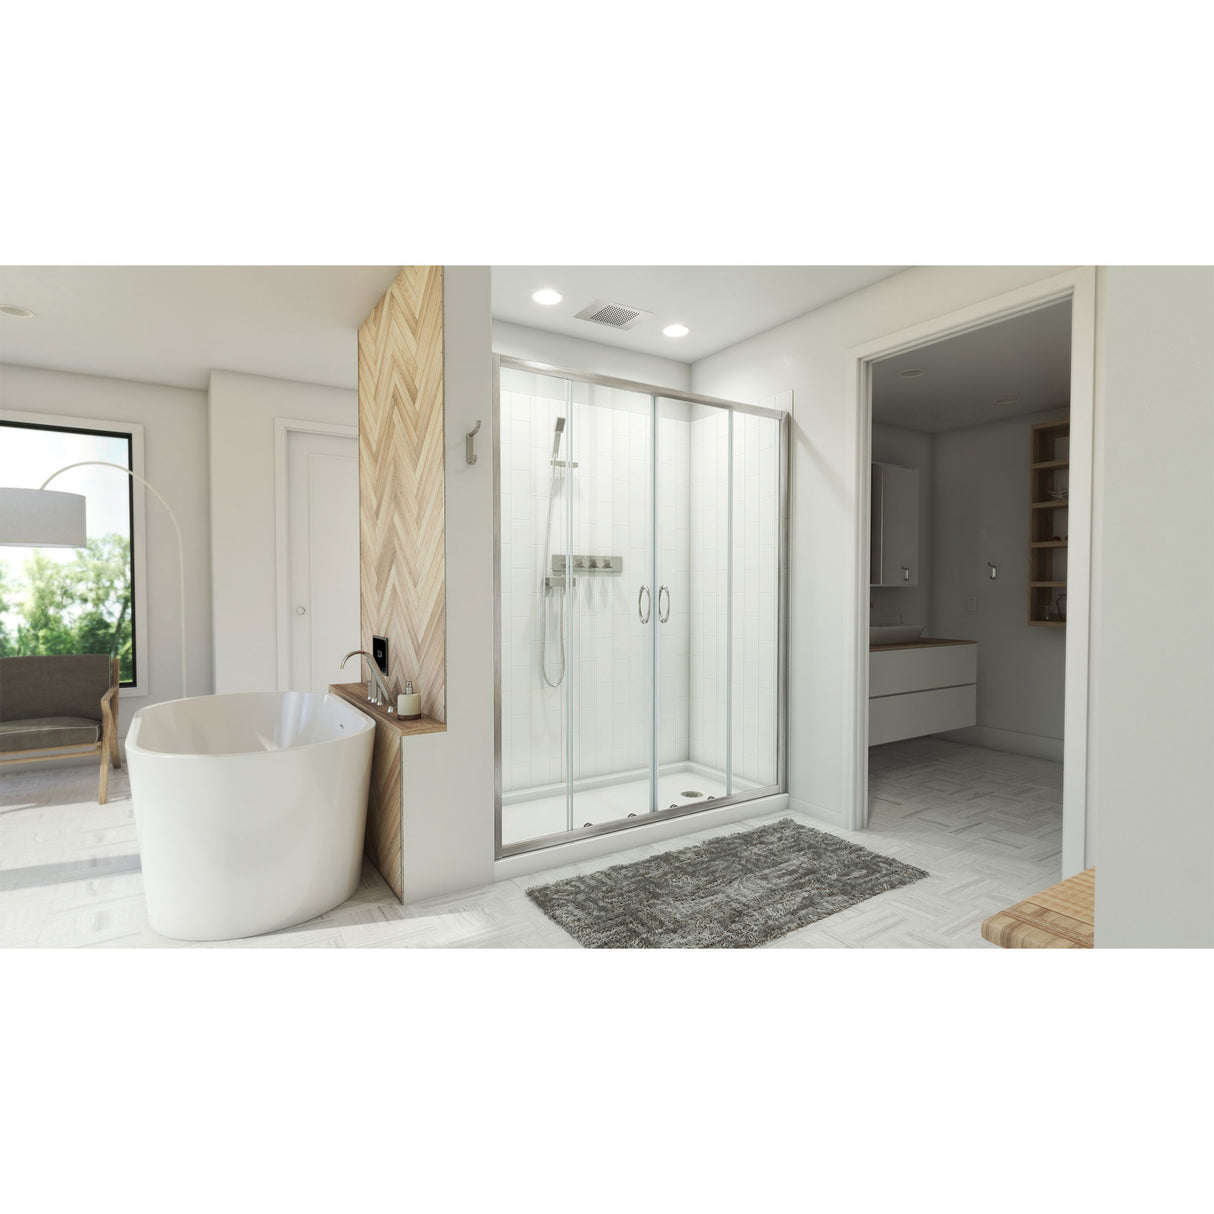 DreamLine Visions 32 in. D x 60 in. W x 78 3/4 in. H Sliding Shower Door, Base, and White Wall Kit in Brushed Nickel